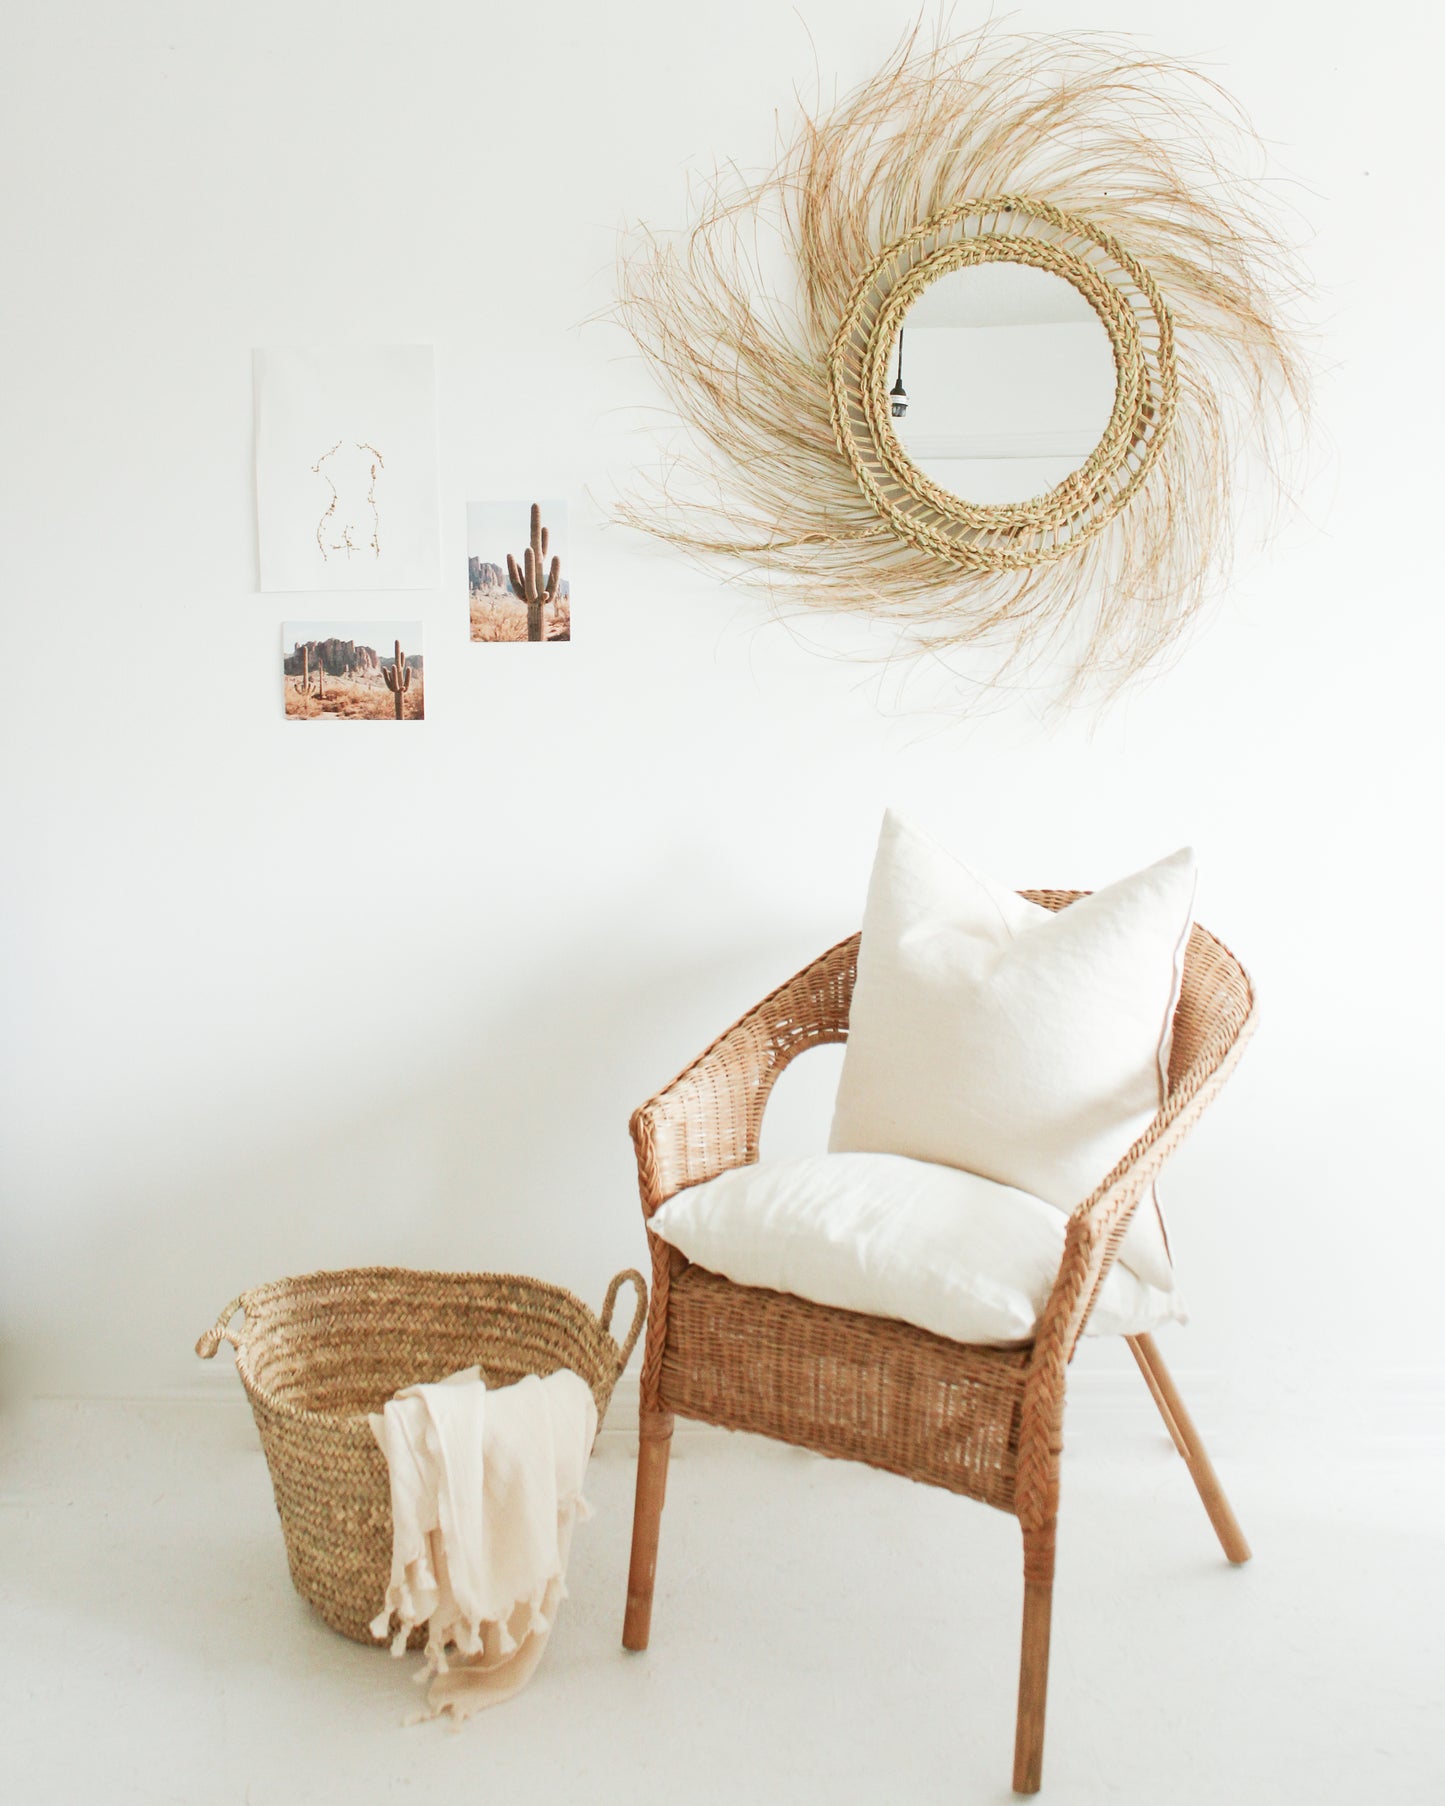 Seagrass Mirror With Fringes // SUN